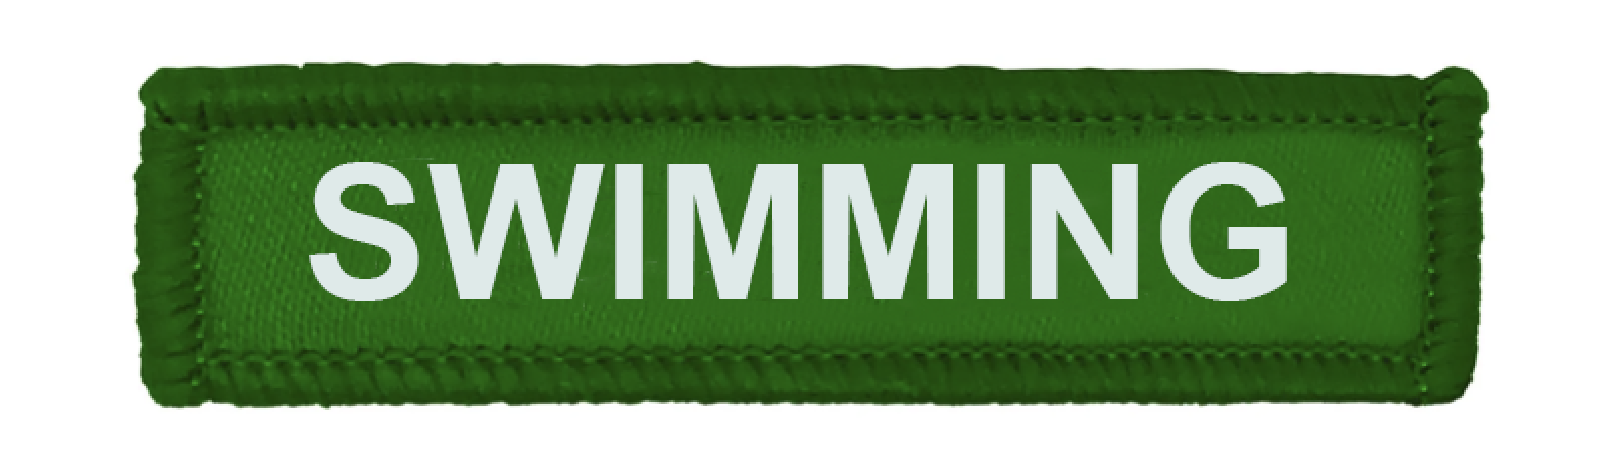 swimming patches green